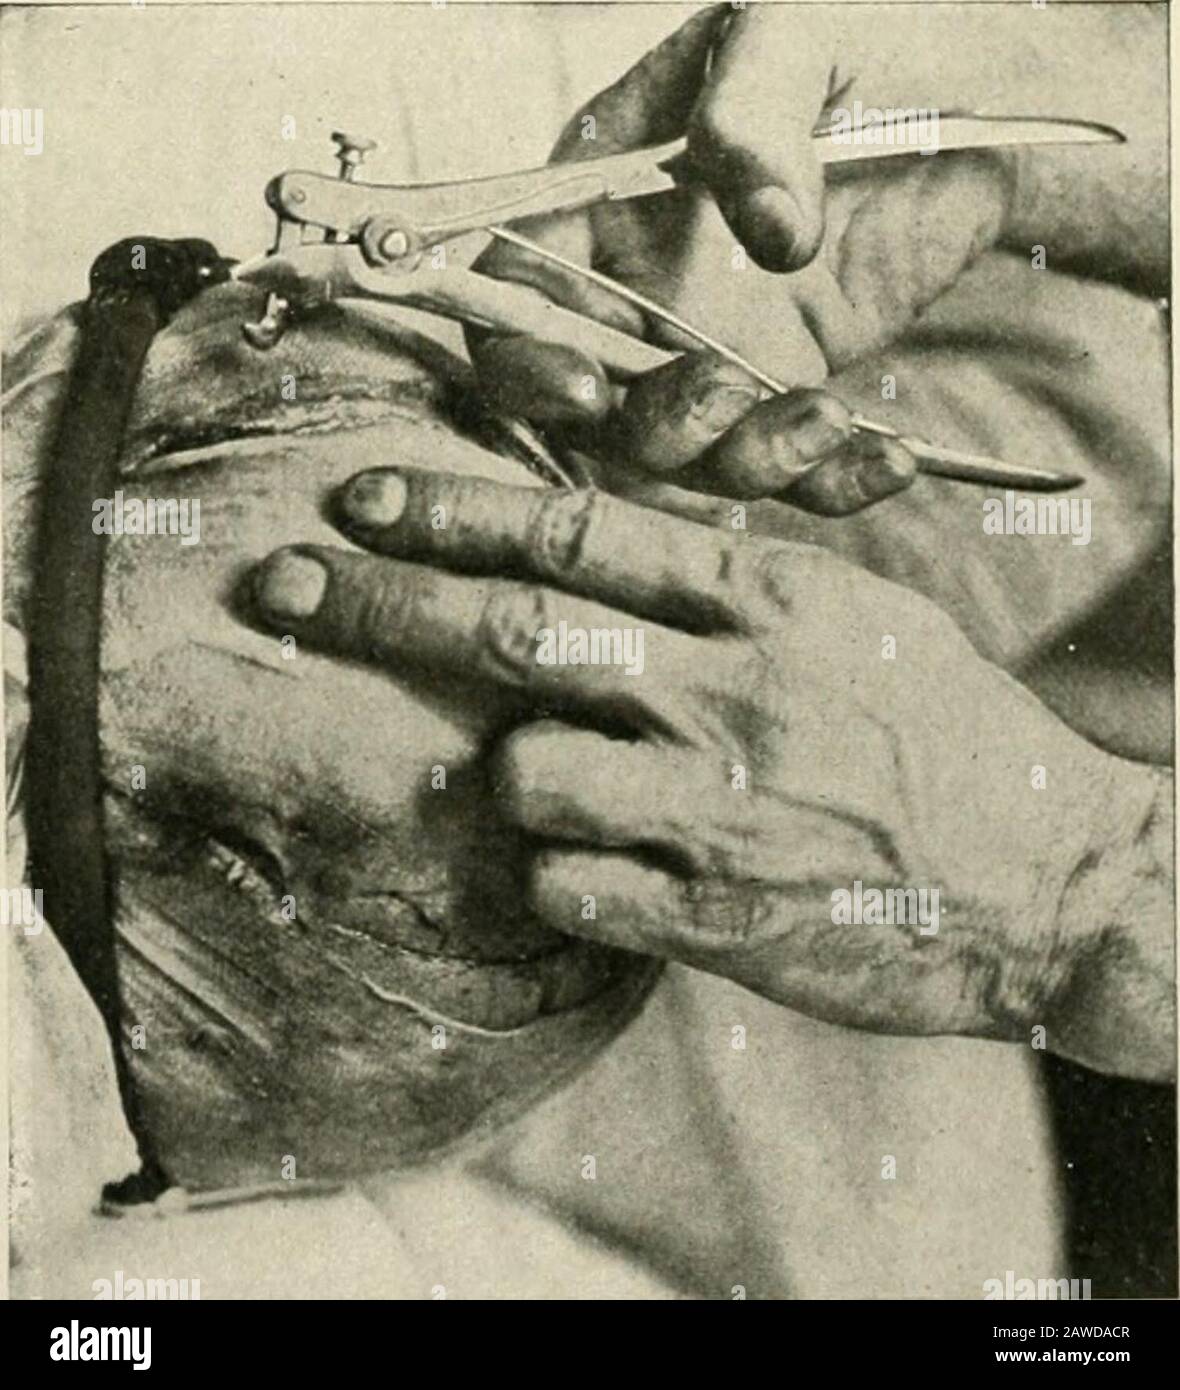 The practice of surgery . Fig. 426.—Opening the skull—step 1 ((usliing in Keens Surgely).. Fig. 427.—Opening the skull—step 2. Dahlgren forceps used for incision oflateral edges of Ijone-flap Avhen approaching thinner jiortion of cranium in temj)oralregion (Gushing in Keens Surgerj-)- The patients head should be shaved completely and this should bedone deftly and gently, preferably on the operating table. Then theanesthetic should be given, and for this I use ether. With the patient INTRACRANIAL OPERATIONS 665 unconscious, cleanse the skin, and over the whole head throw a wetbichlorid compress Stock Photo